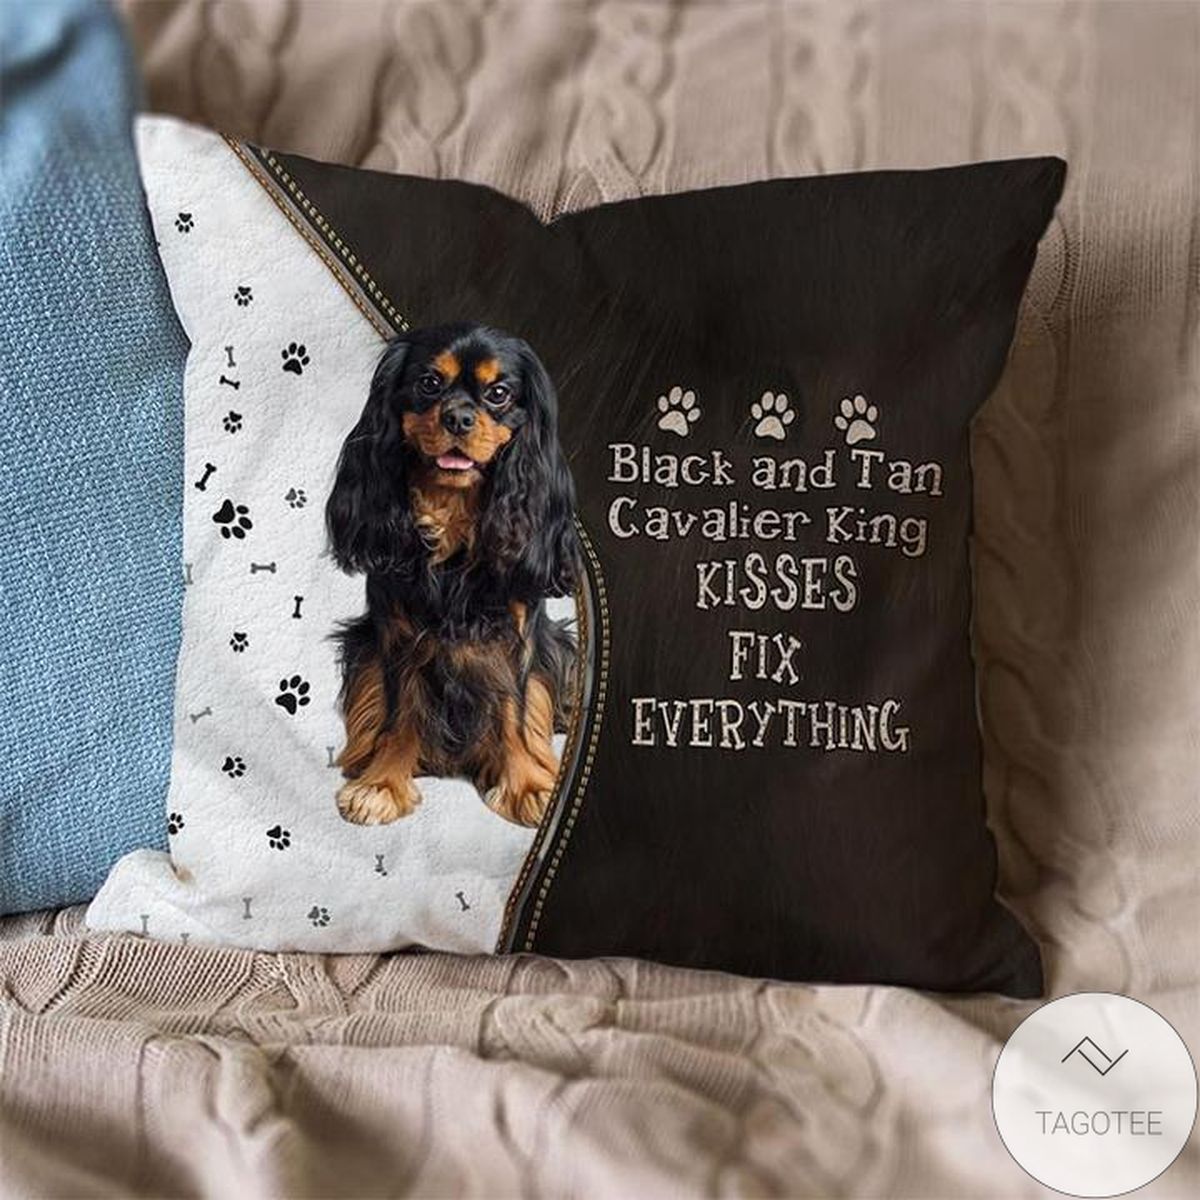 Black And Tan Cavalier King Kisses Fix Everything Pillowcase